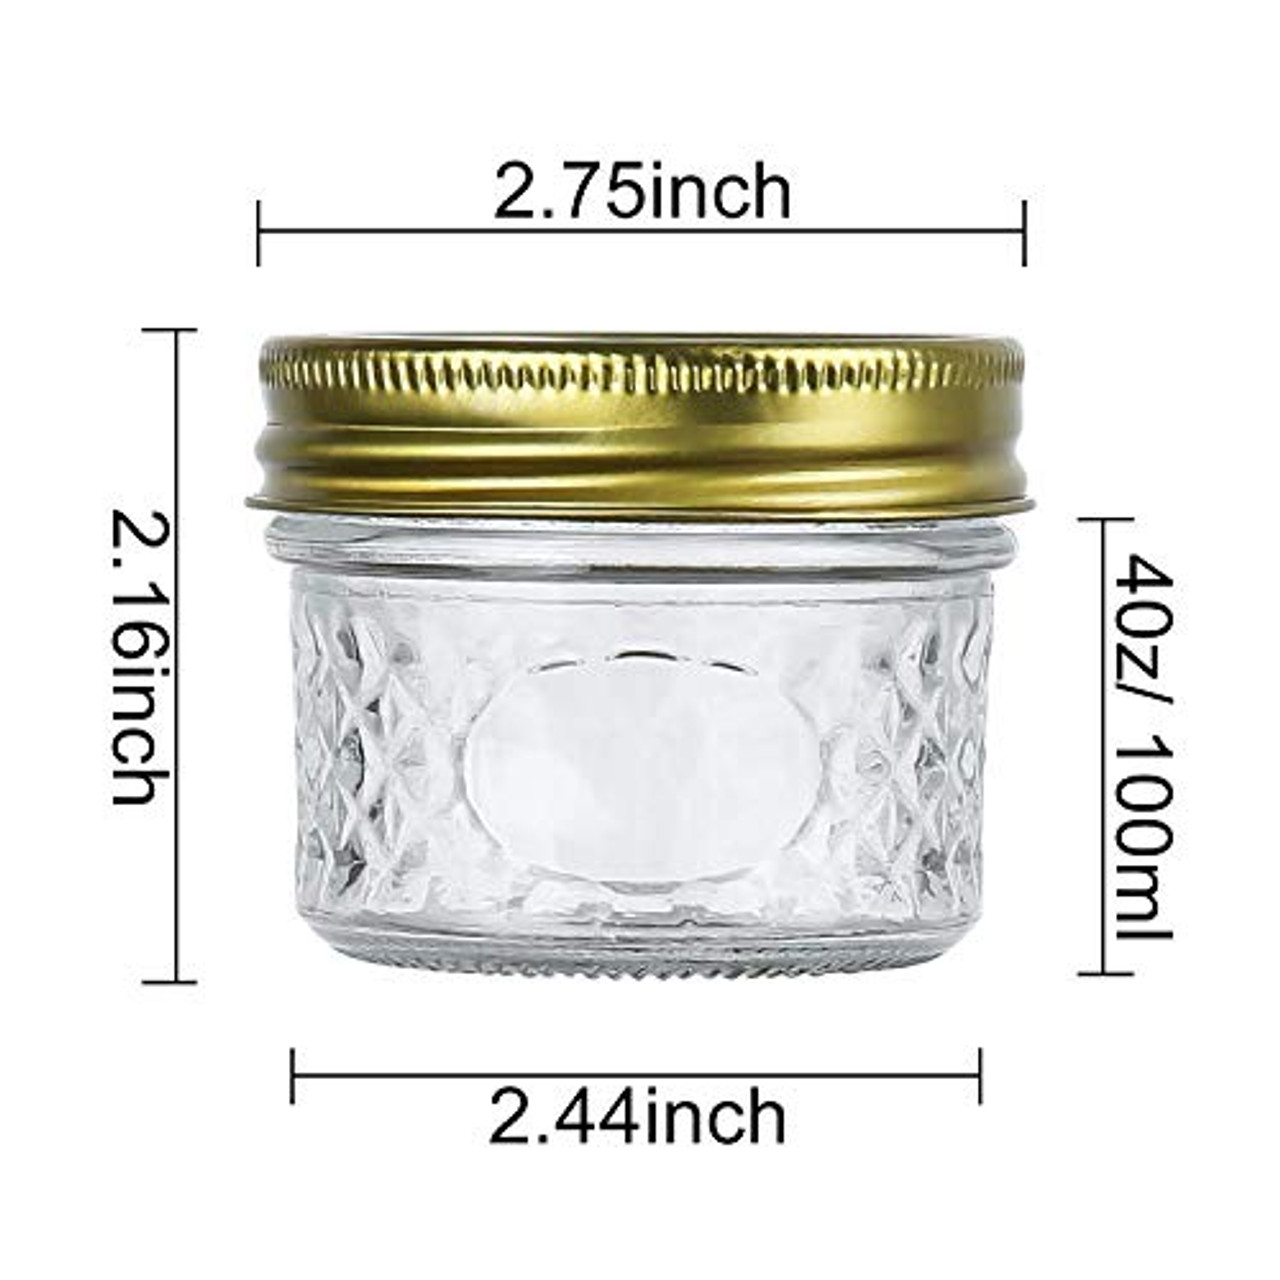 4oz Glass Jars With Regular Lids,Mini Wide Mouth Mason Jars,Clear Small  Canning Jars With Gold Lids,Canning Jars For Honey,Herbs,Jam,Jelly,Baby